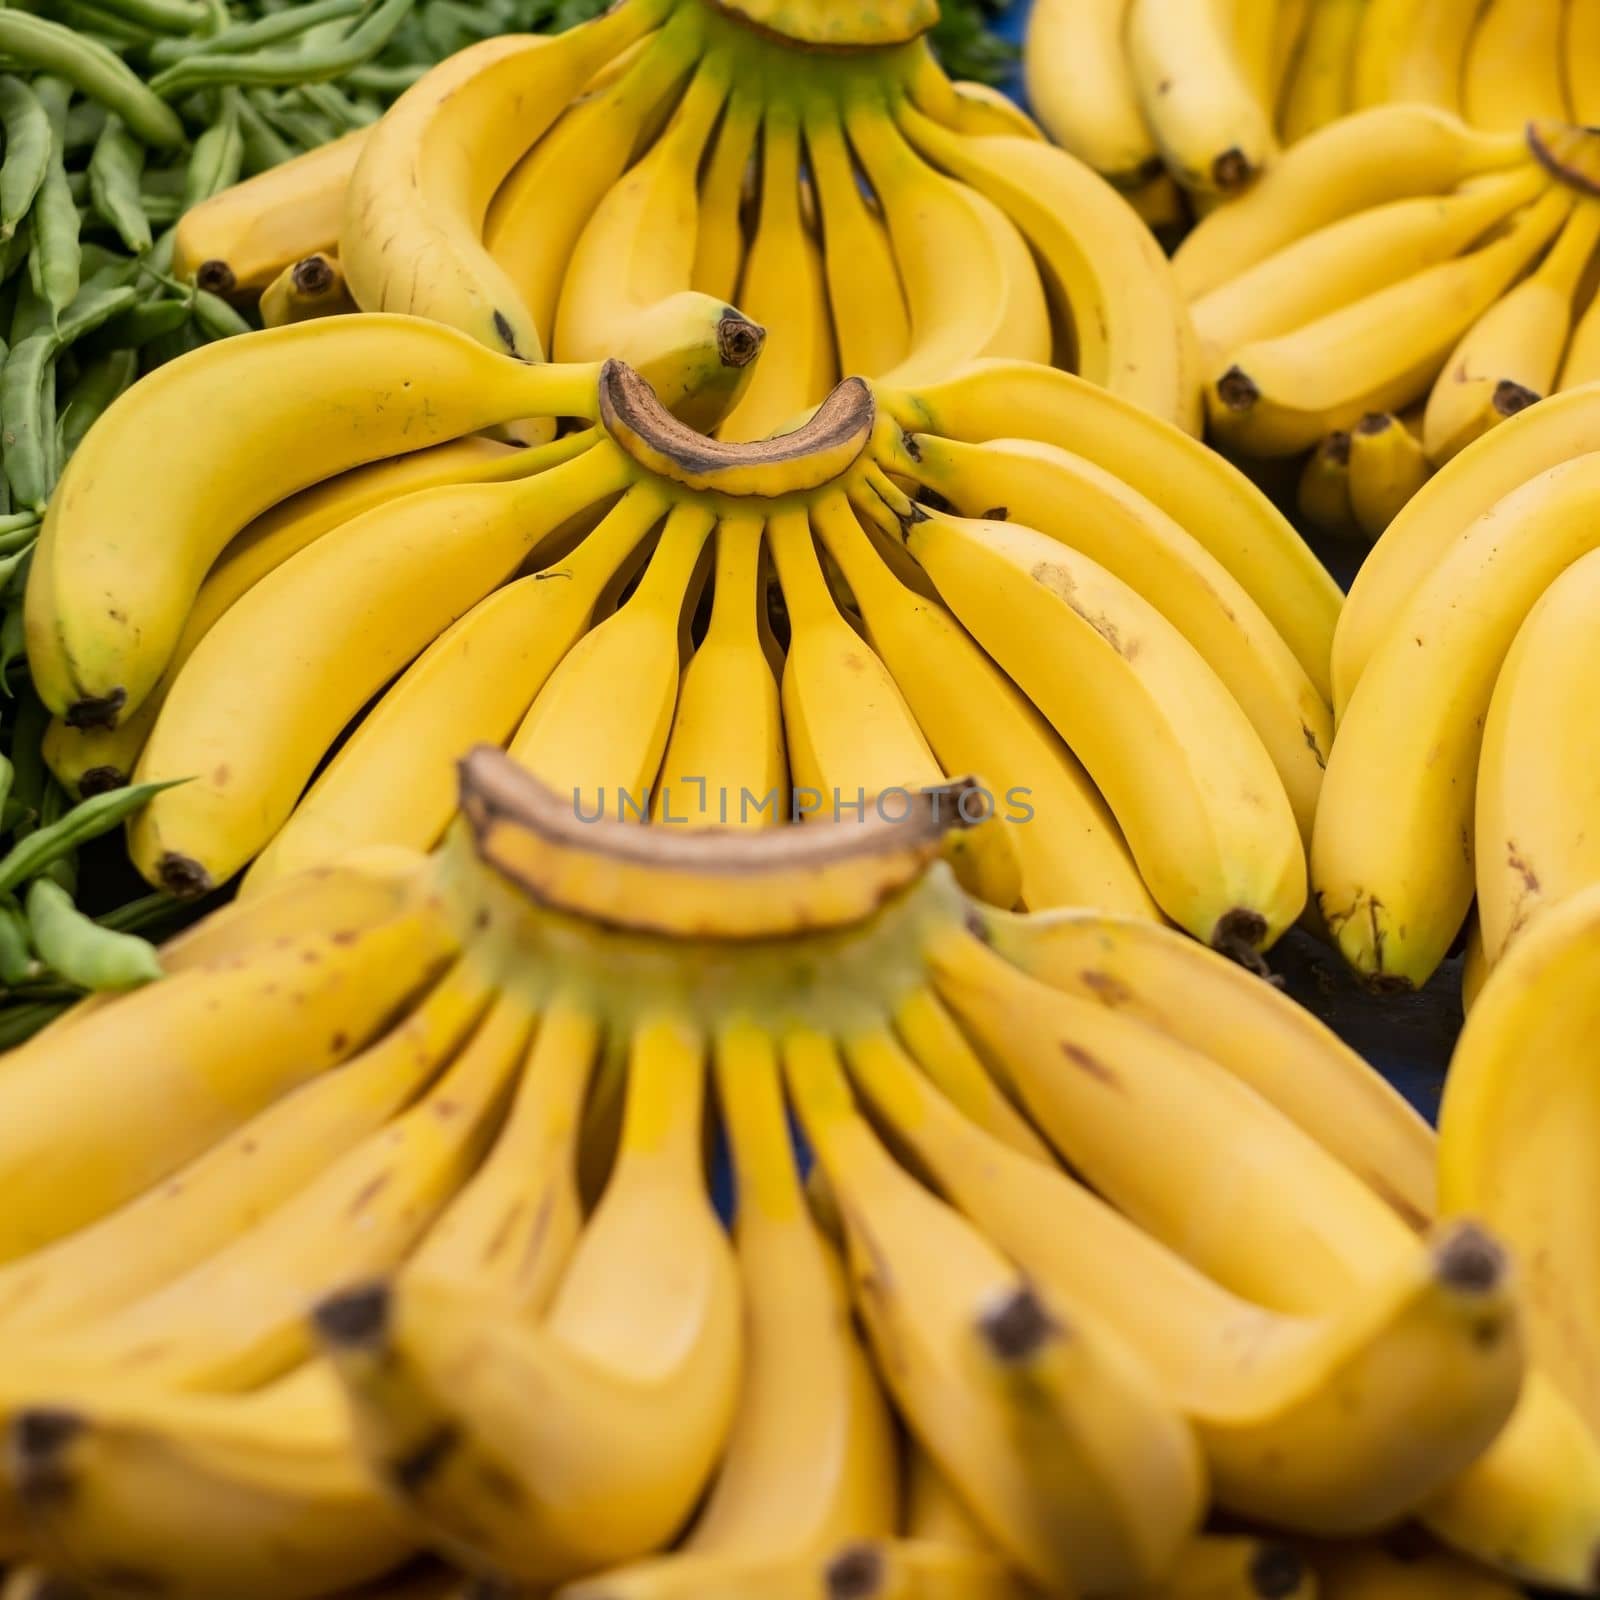 Bunch of ripened bananas at grocery store by koldunov